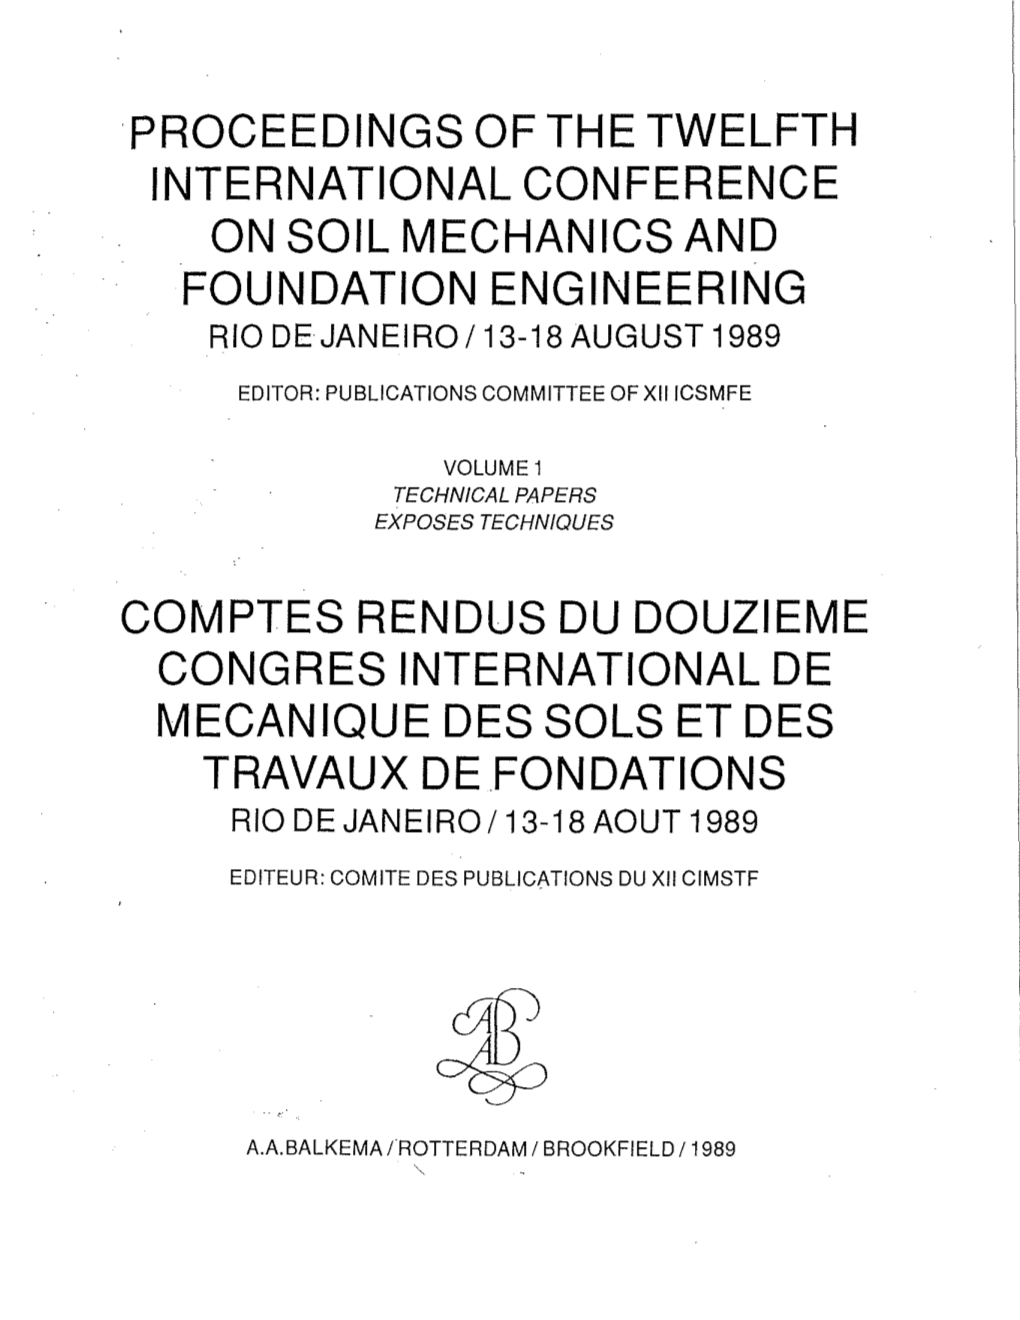 Proceedings of the Twelfth International Conference on Soil Mechanics and Foundation Engineering Rio Dejaneiro/ 13-18 August 1989